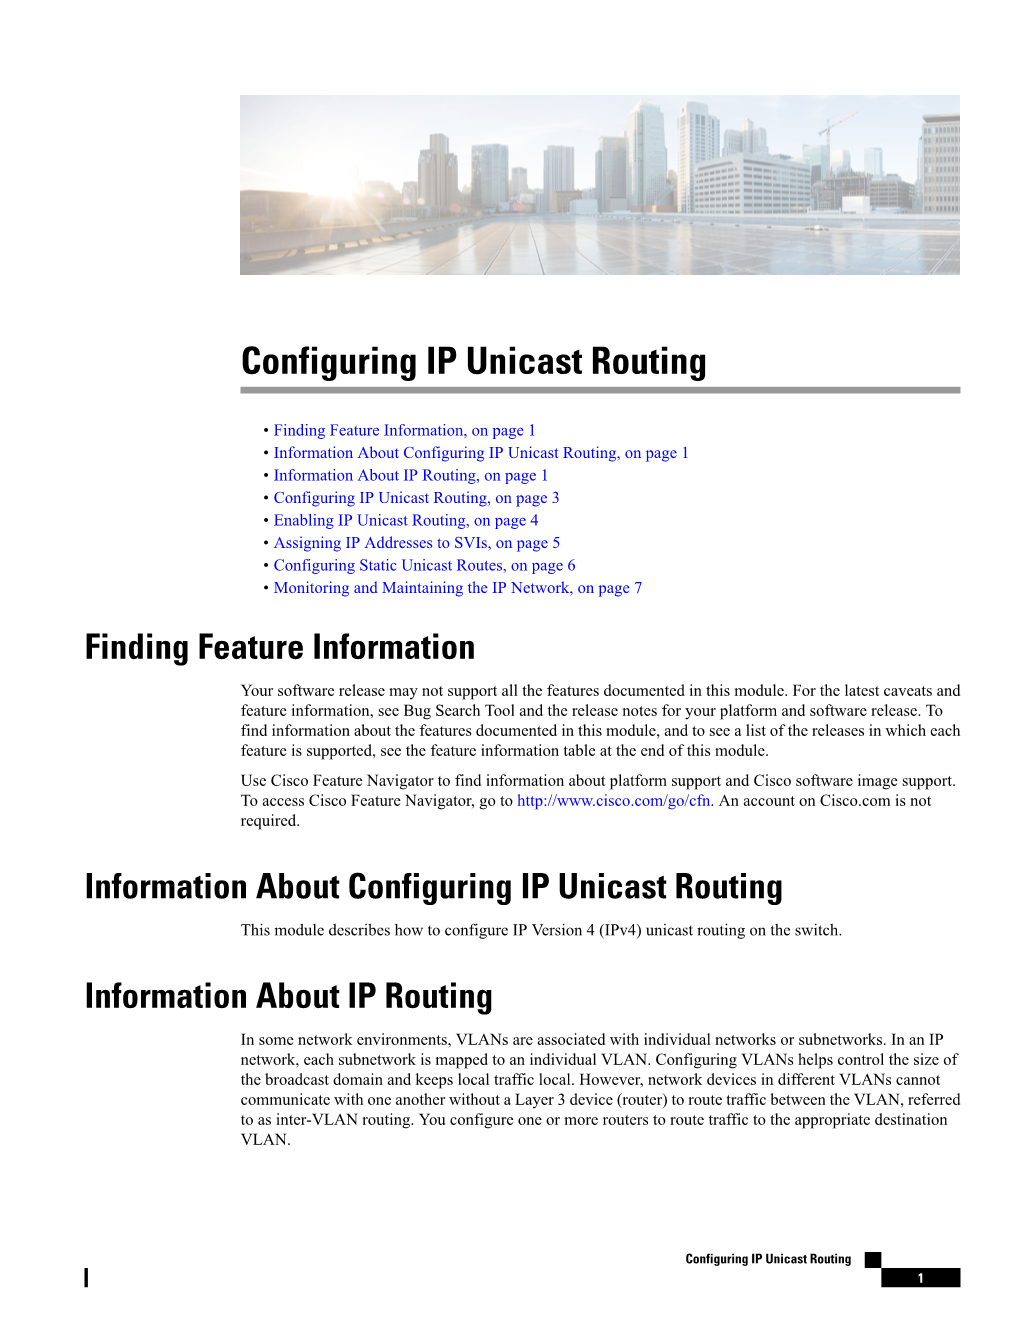 Configuring IP Unicast Routing